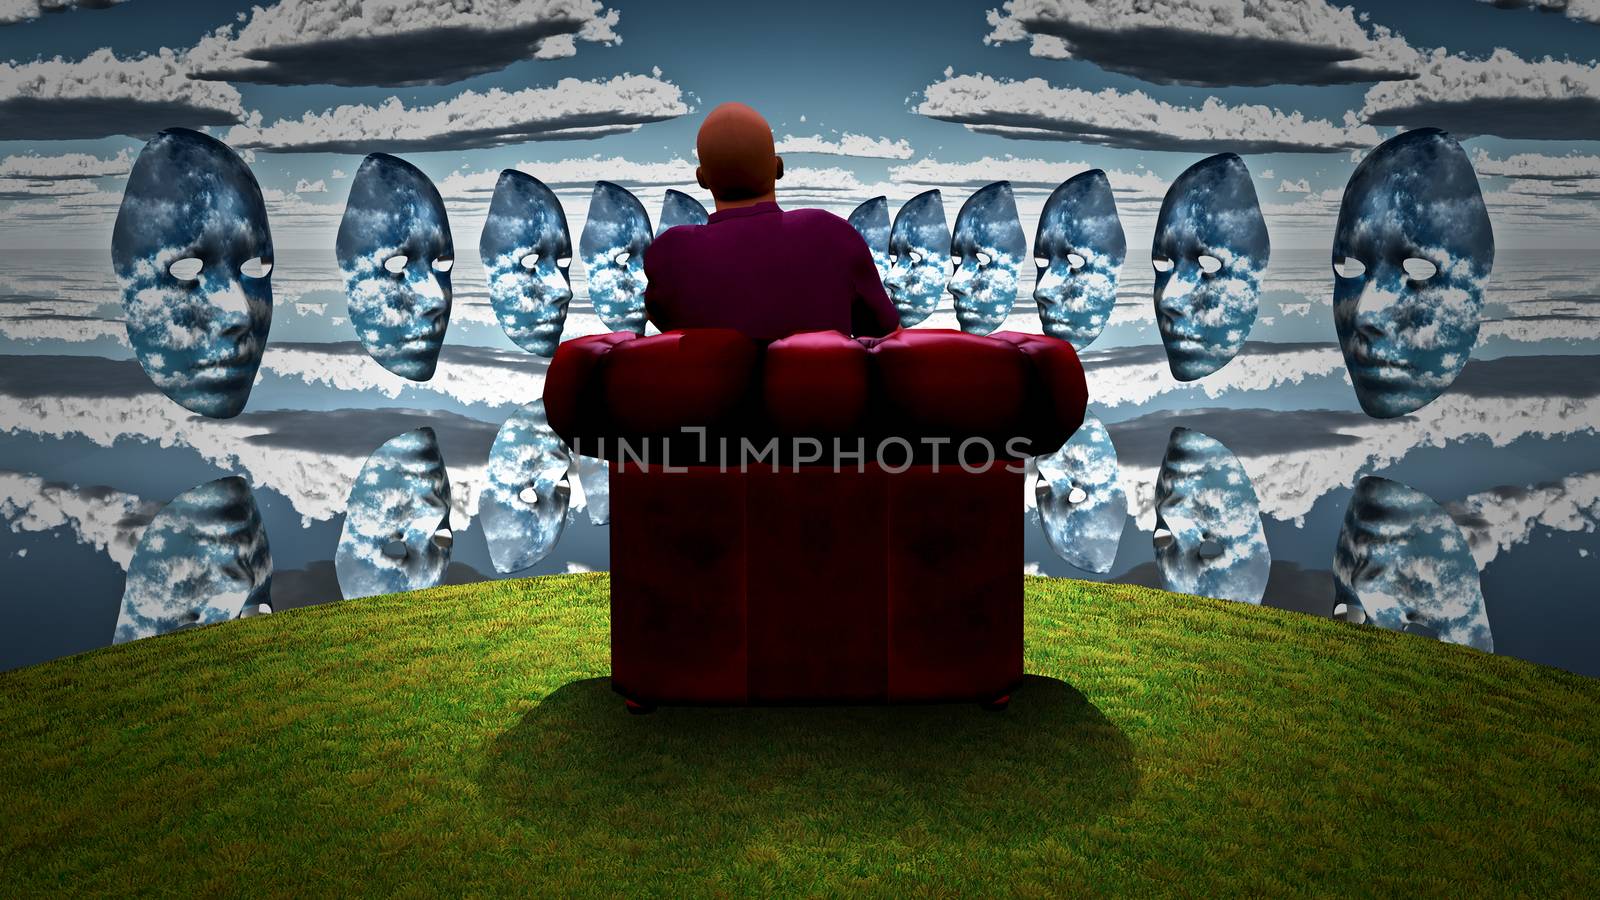 Surreal composition. Man sits in red armchair and observes women`s masks with clouds pattern.